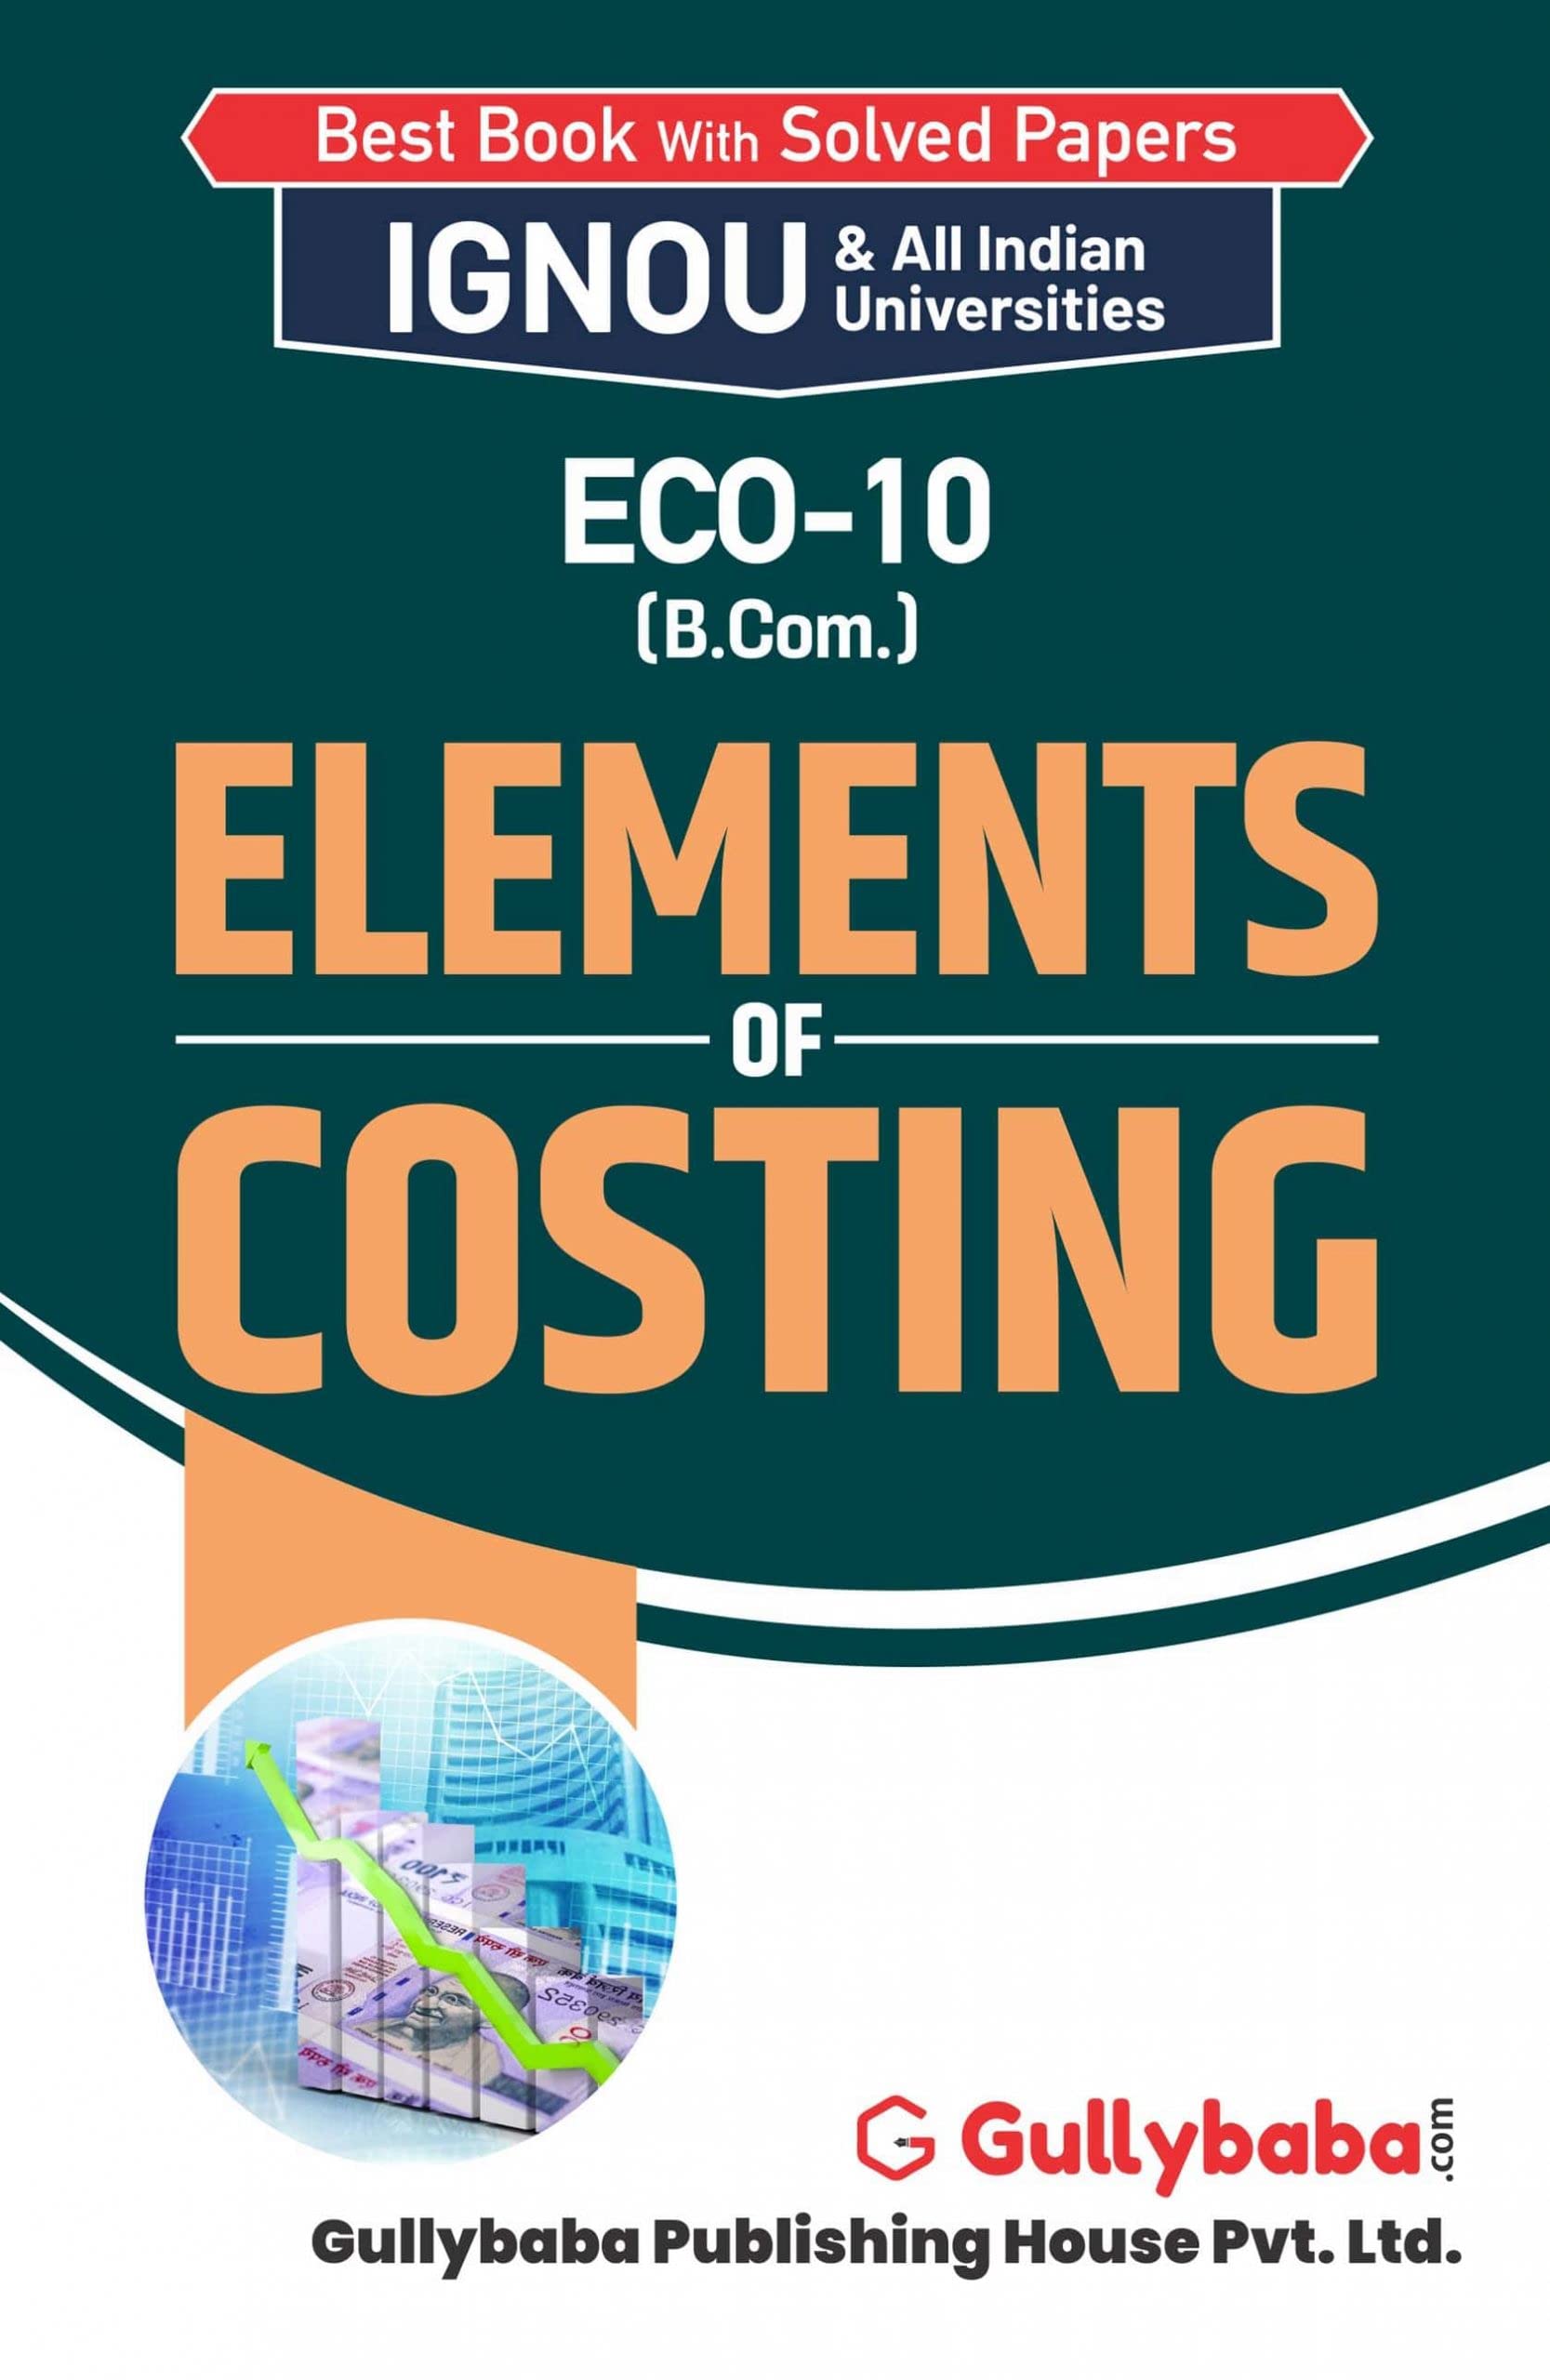 NEW Gullybaba IGNOU B.Com (Latest Edition) ECO-10 Elements of Costing In English Medium, IGNOU Help Books with Solved Sample Question Papers and Important Exam Notes